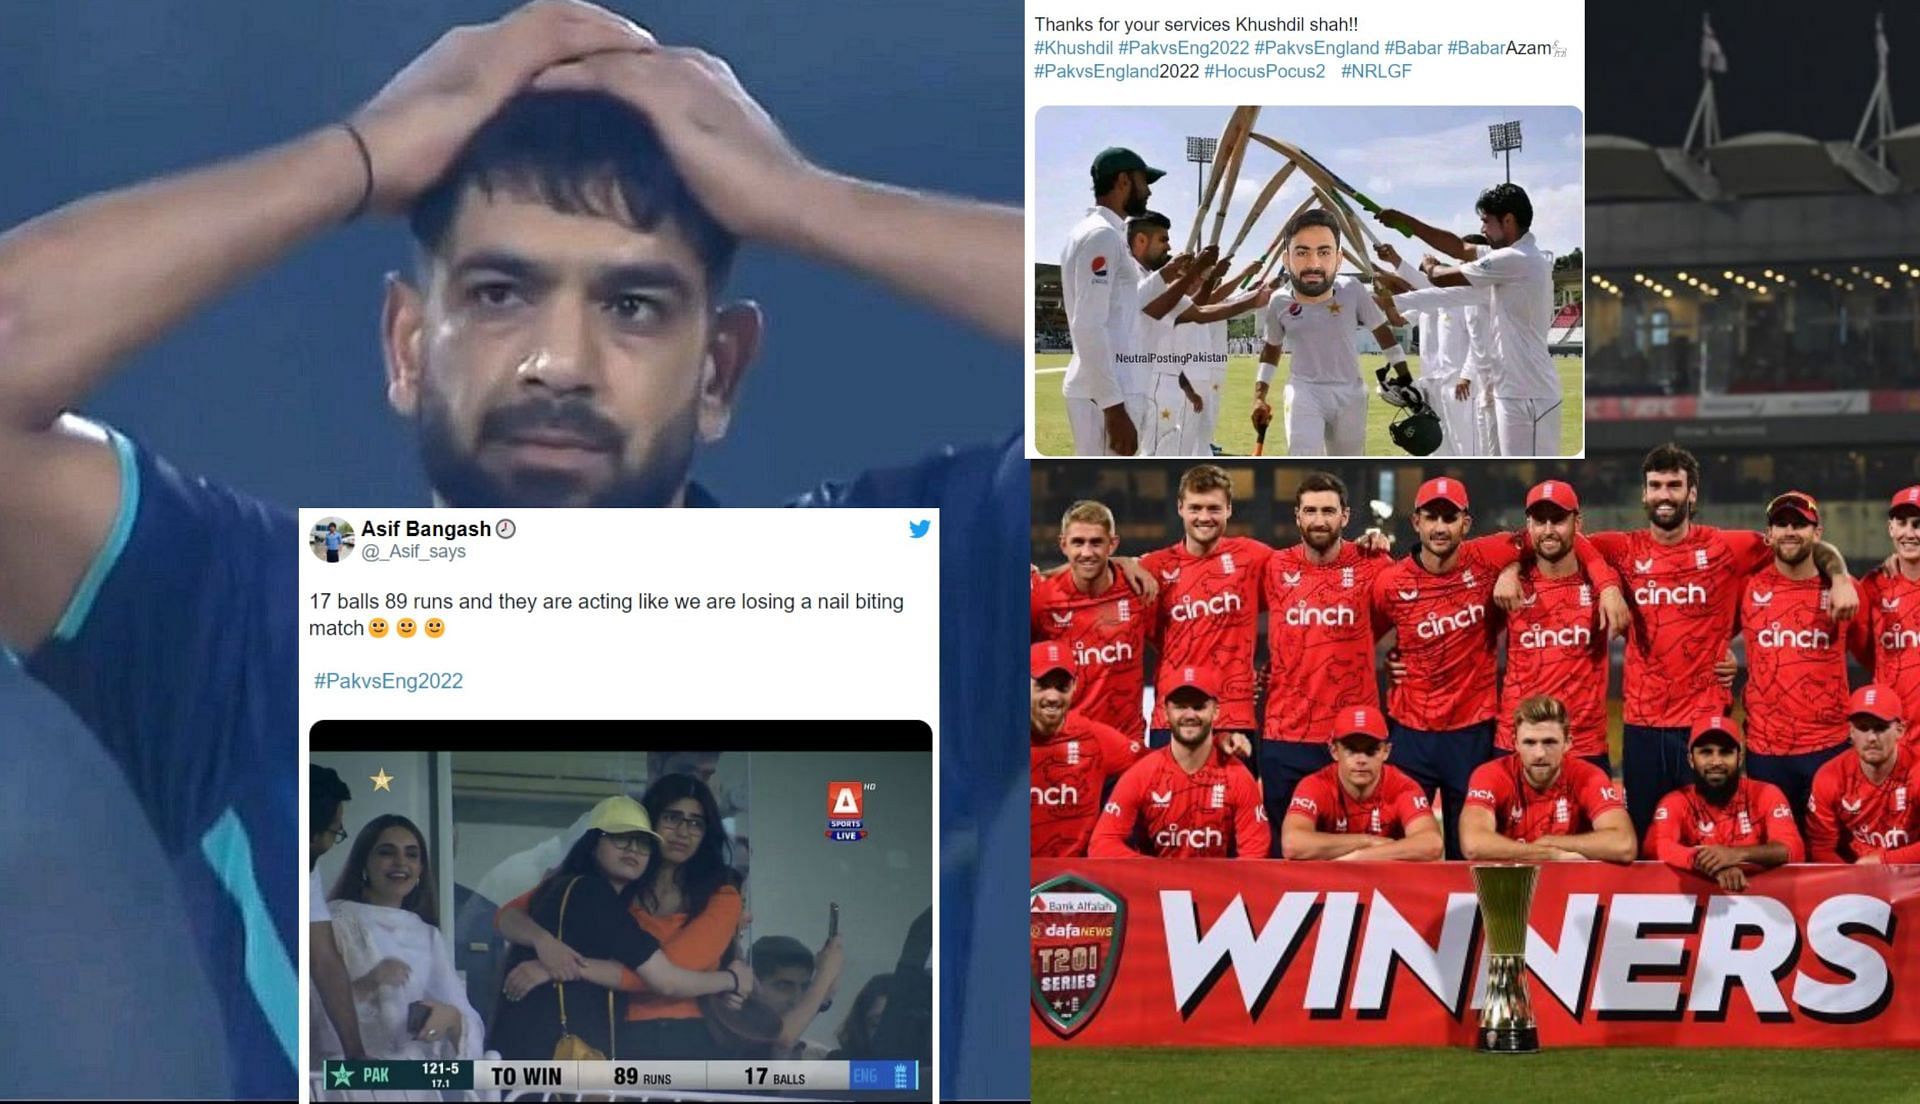 Fans took to social media to share memes after Pakistan lost against England on Sunday